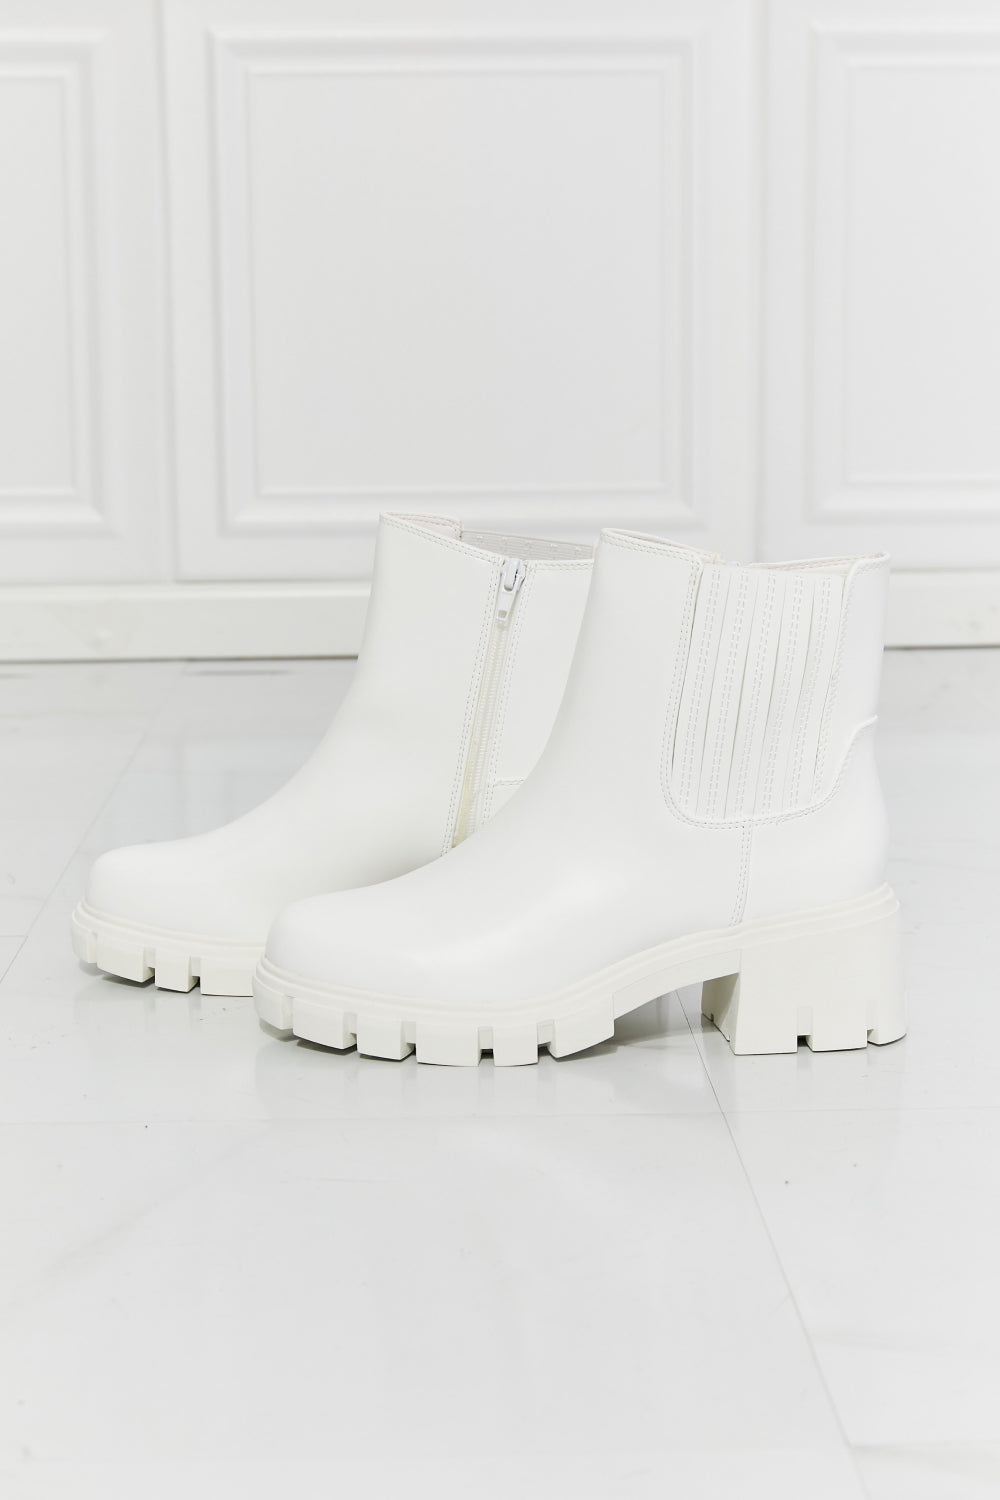 MMShoes What It Takes Lug Sole Chelsea Boots in White - Luv Lush